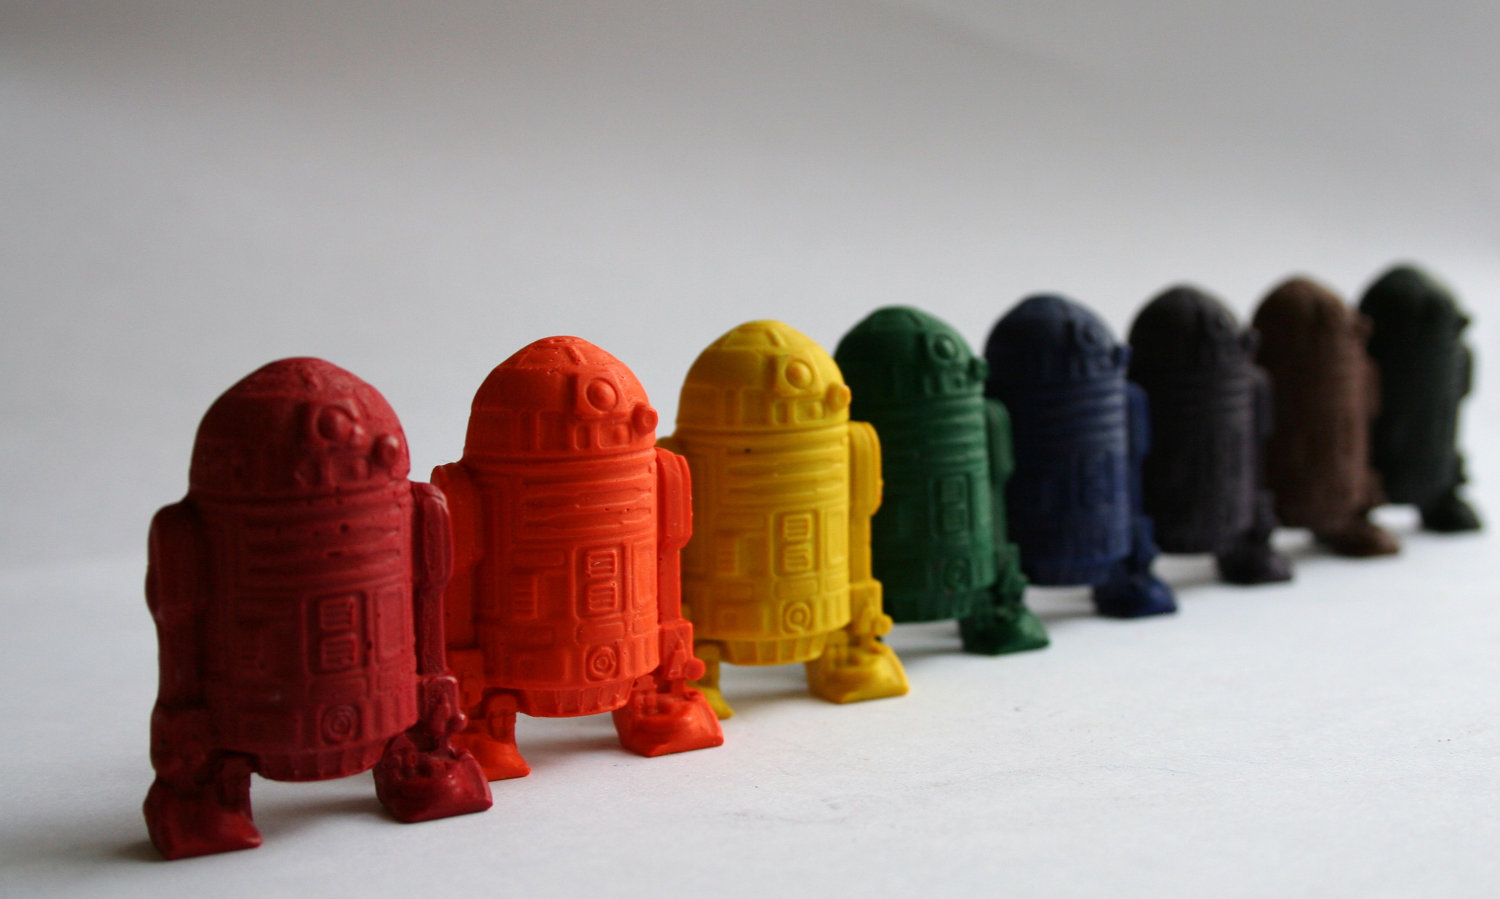 The coolest Star Wars stocking stuffers for kids: Star Wars crayons 